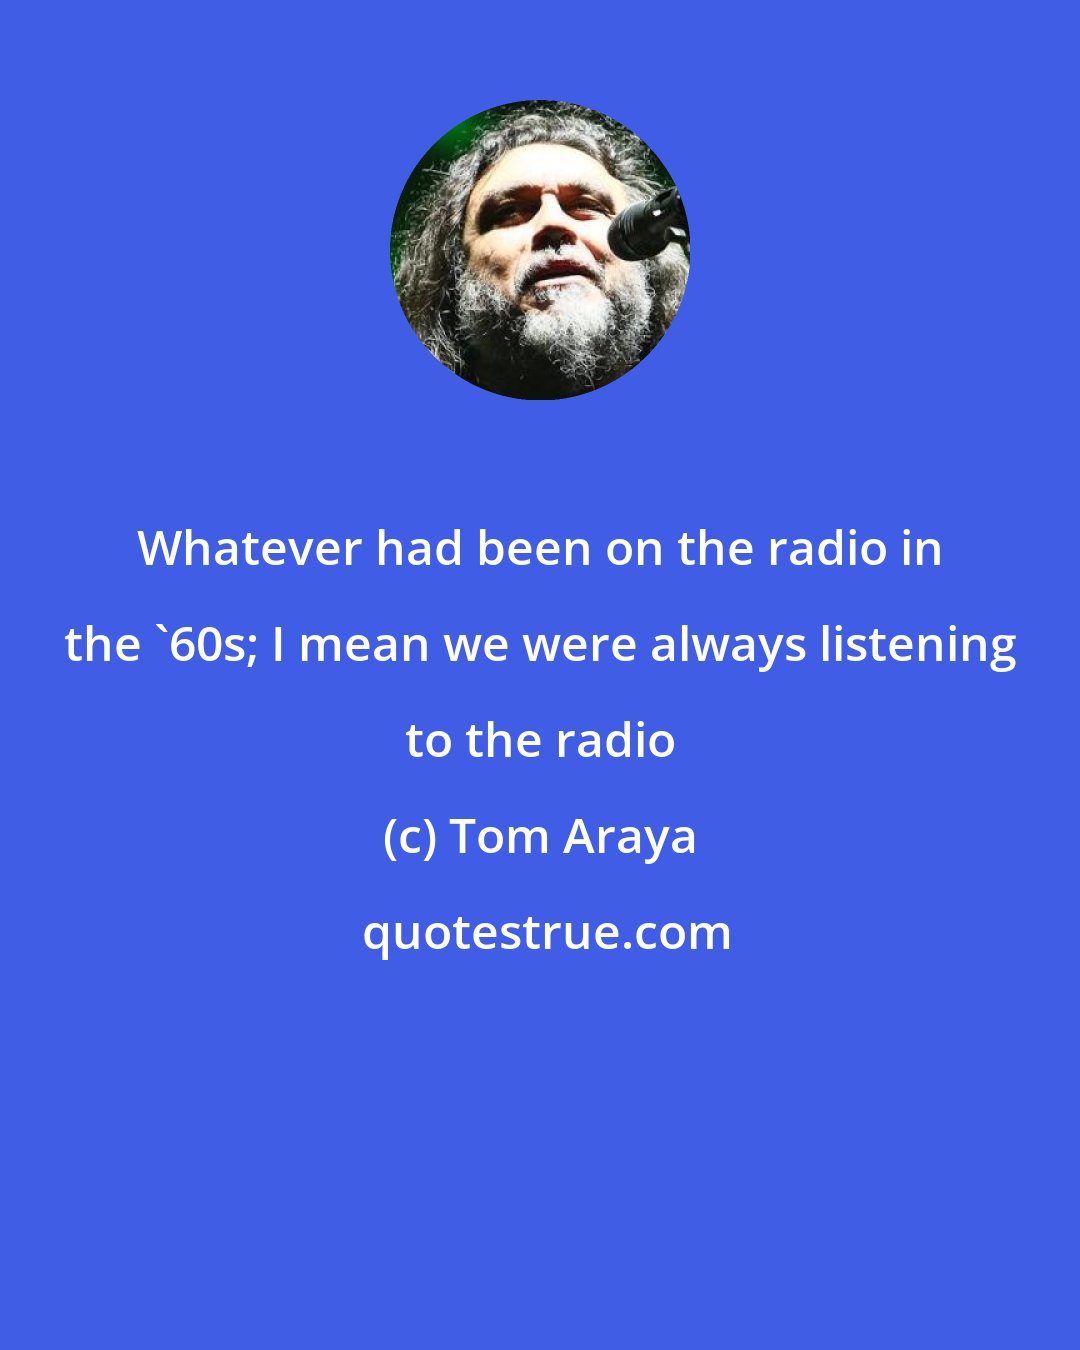 Tom Araya: Whatever had been on the radio in the '60s; I mean we were always listening to the radio